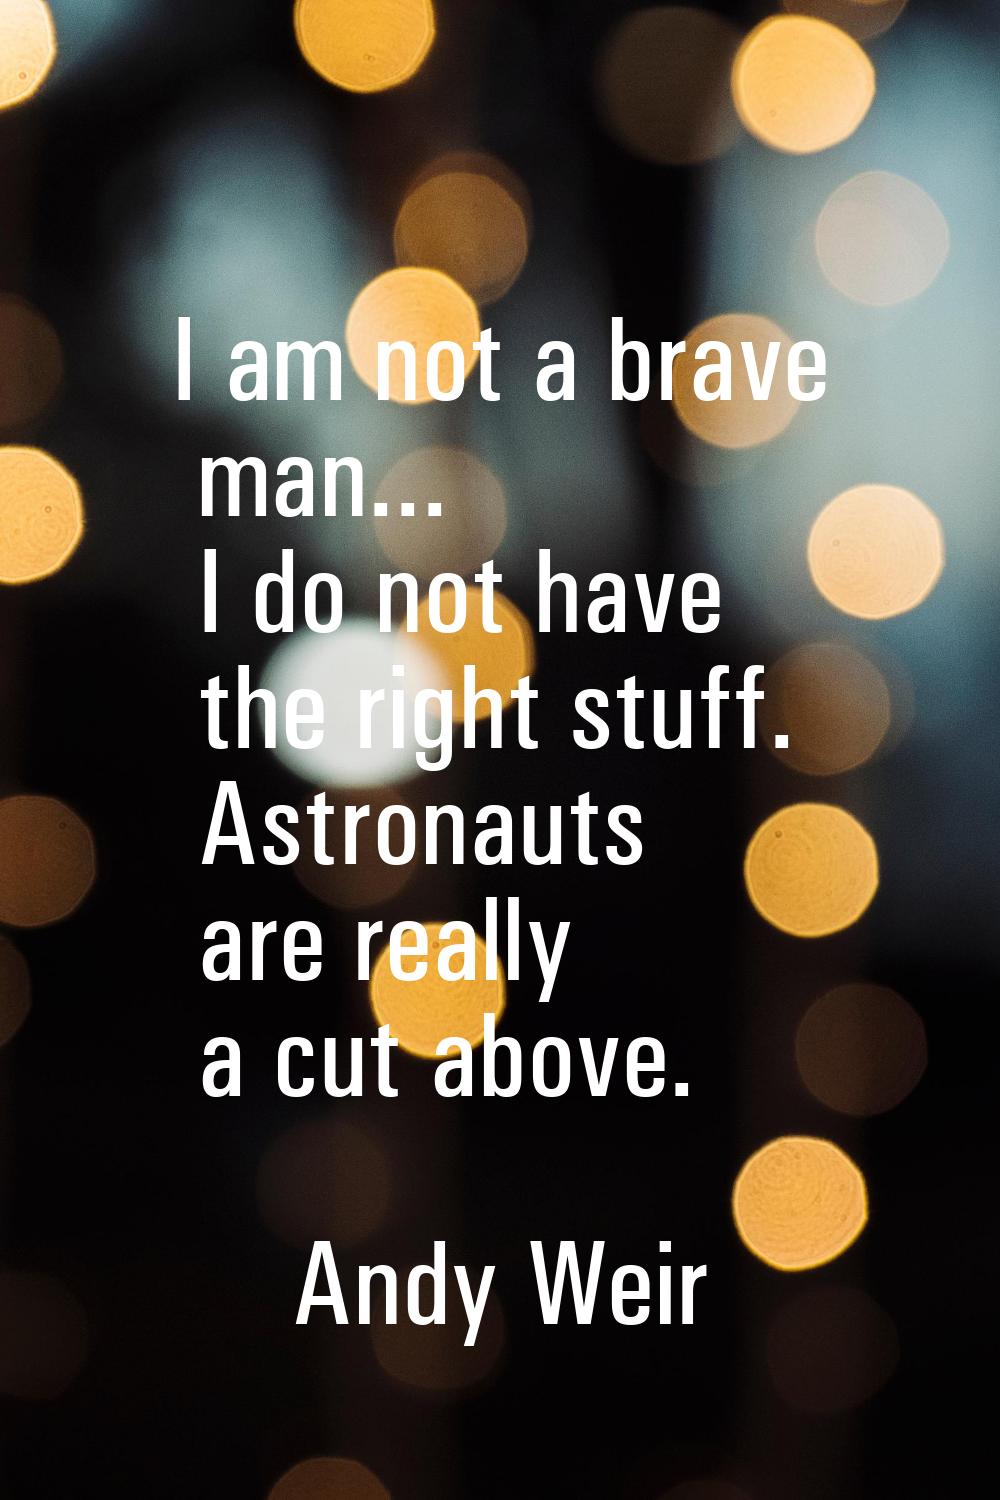 I am not a brave man... I do not have the right stuff. Astronauts are really a cut above.